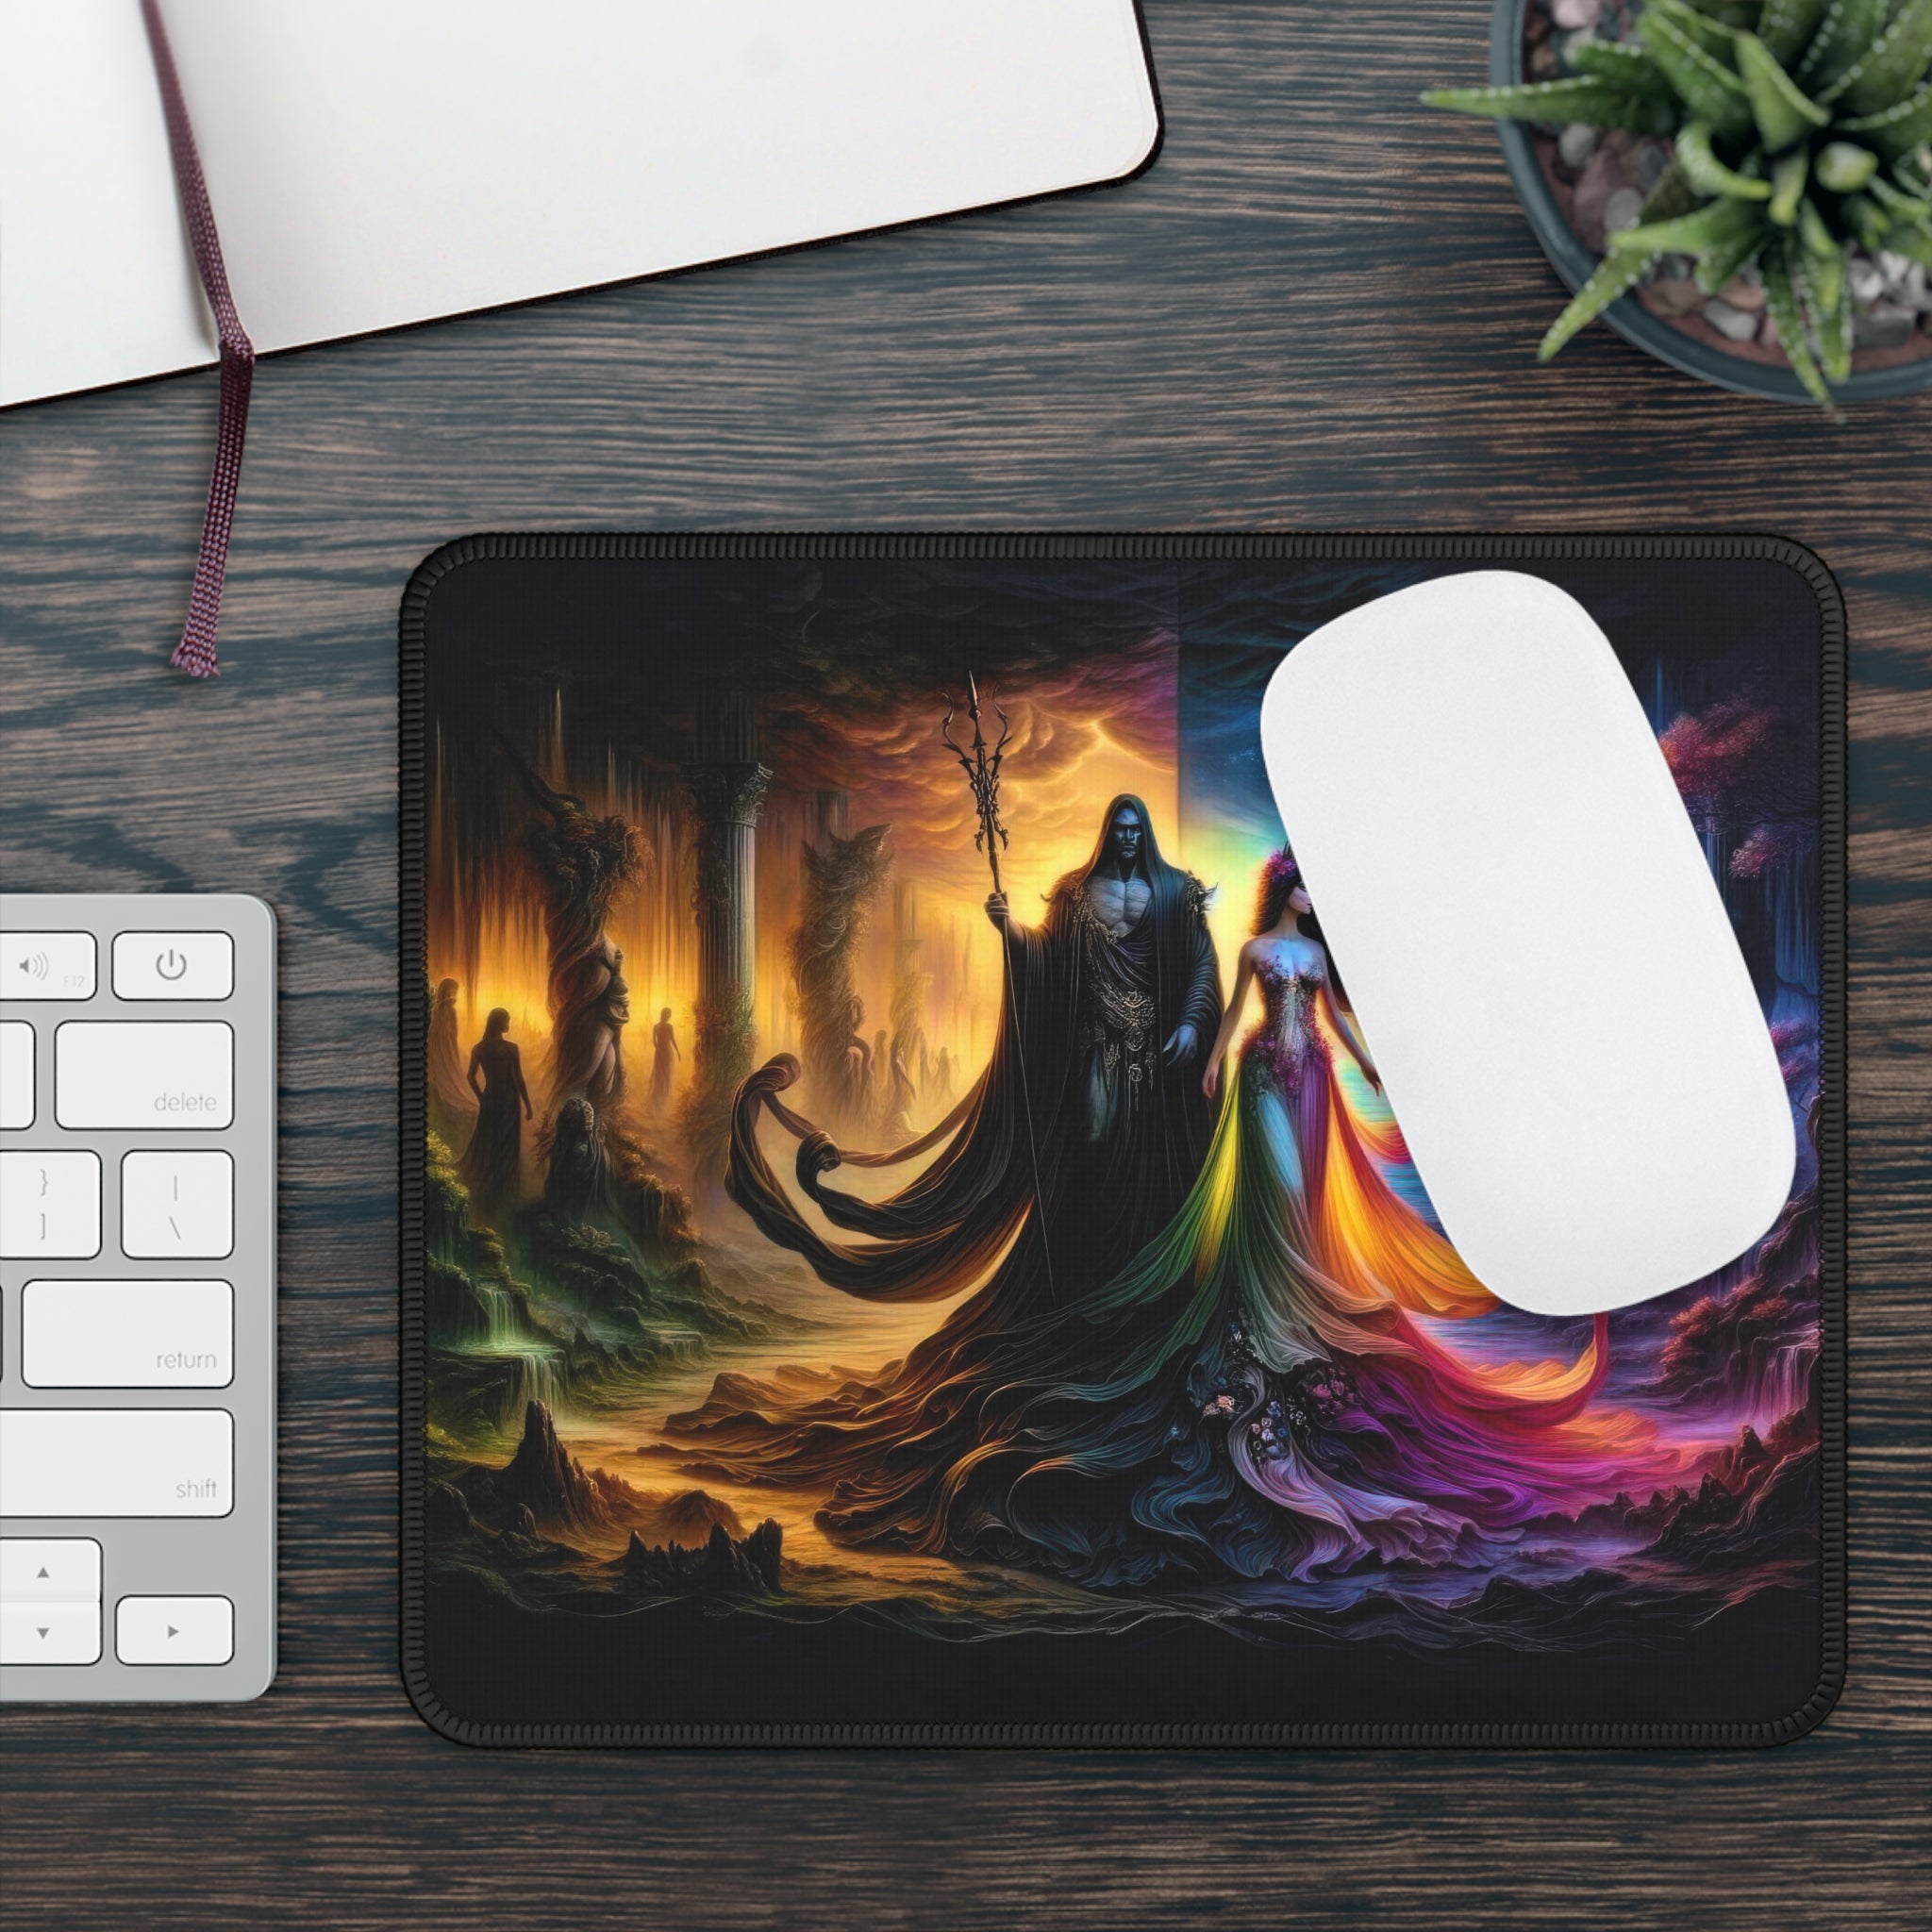 Twilight of the Gods Hades and Persephone Gaming Mouse Pad